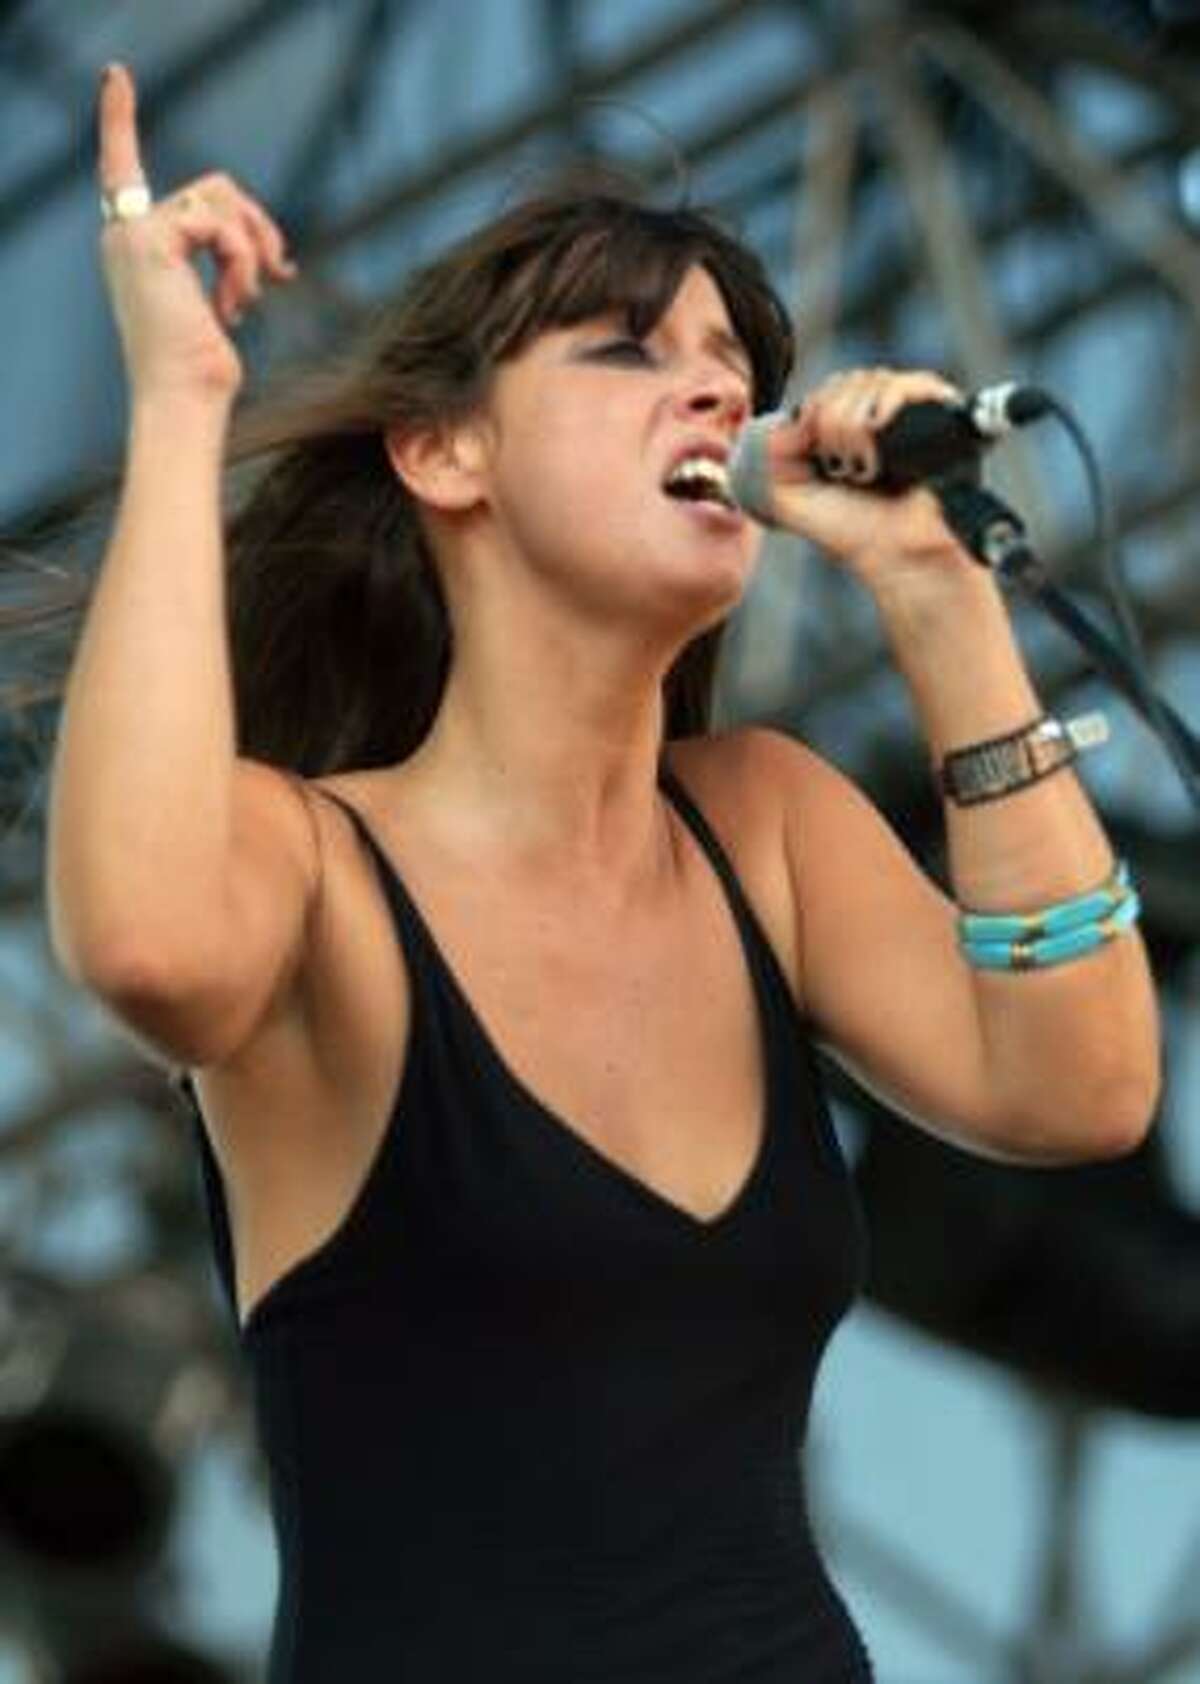 Cat Power, whose real name is Chan Marshall, had been a past finalist for the Shortlist.